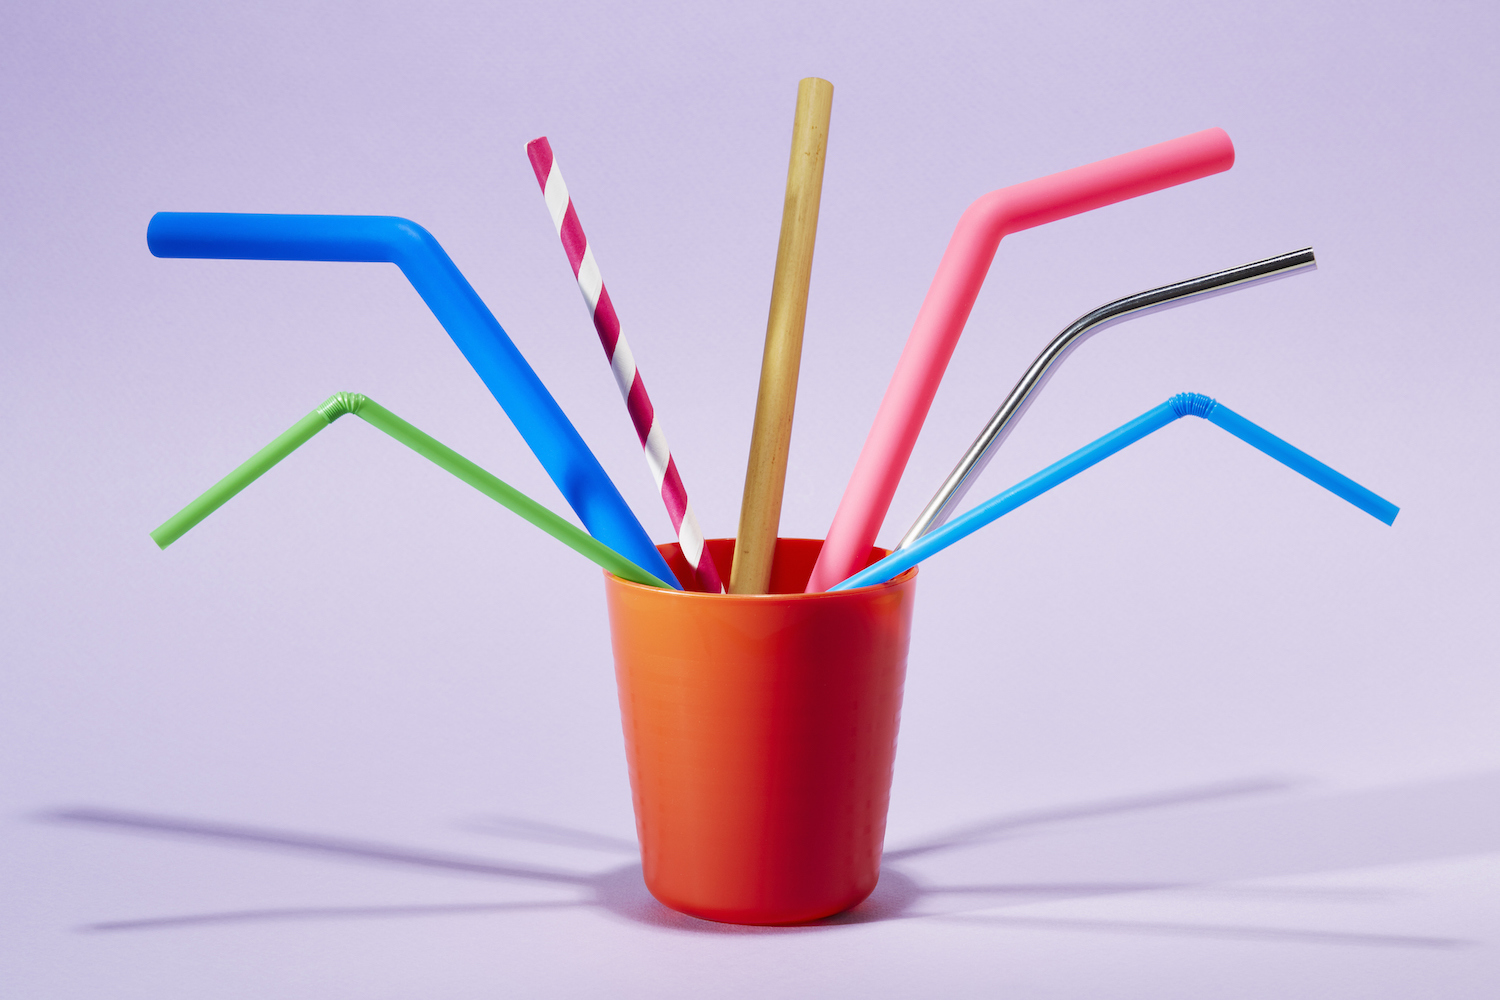 Seven different drinking straws in one cup